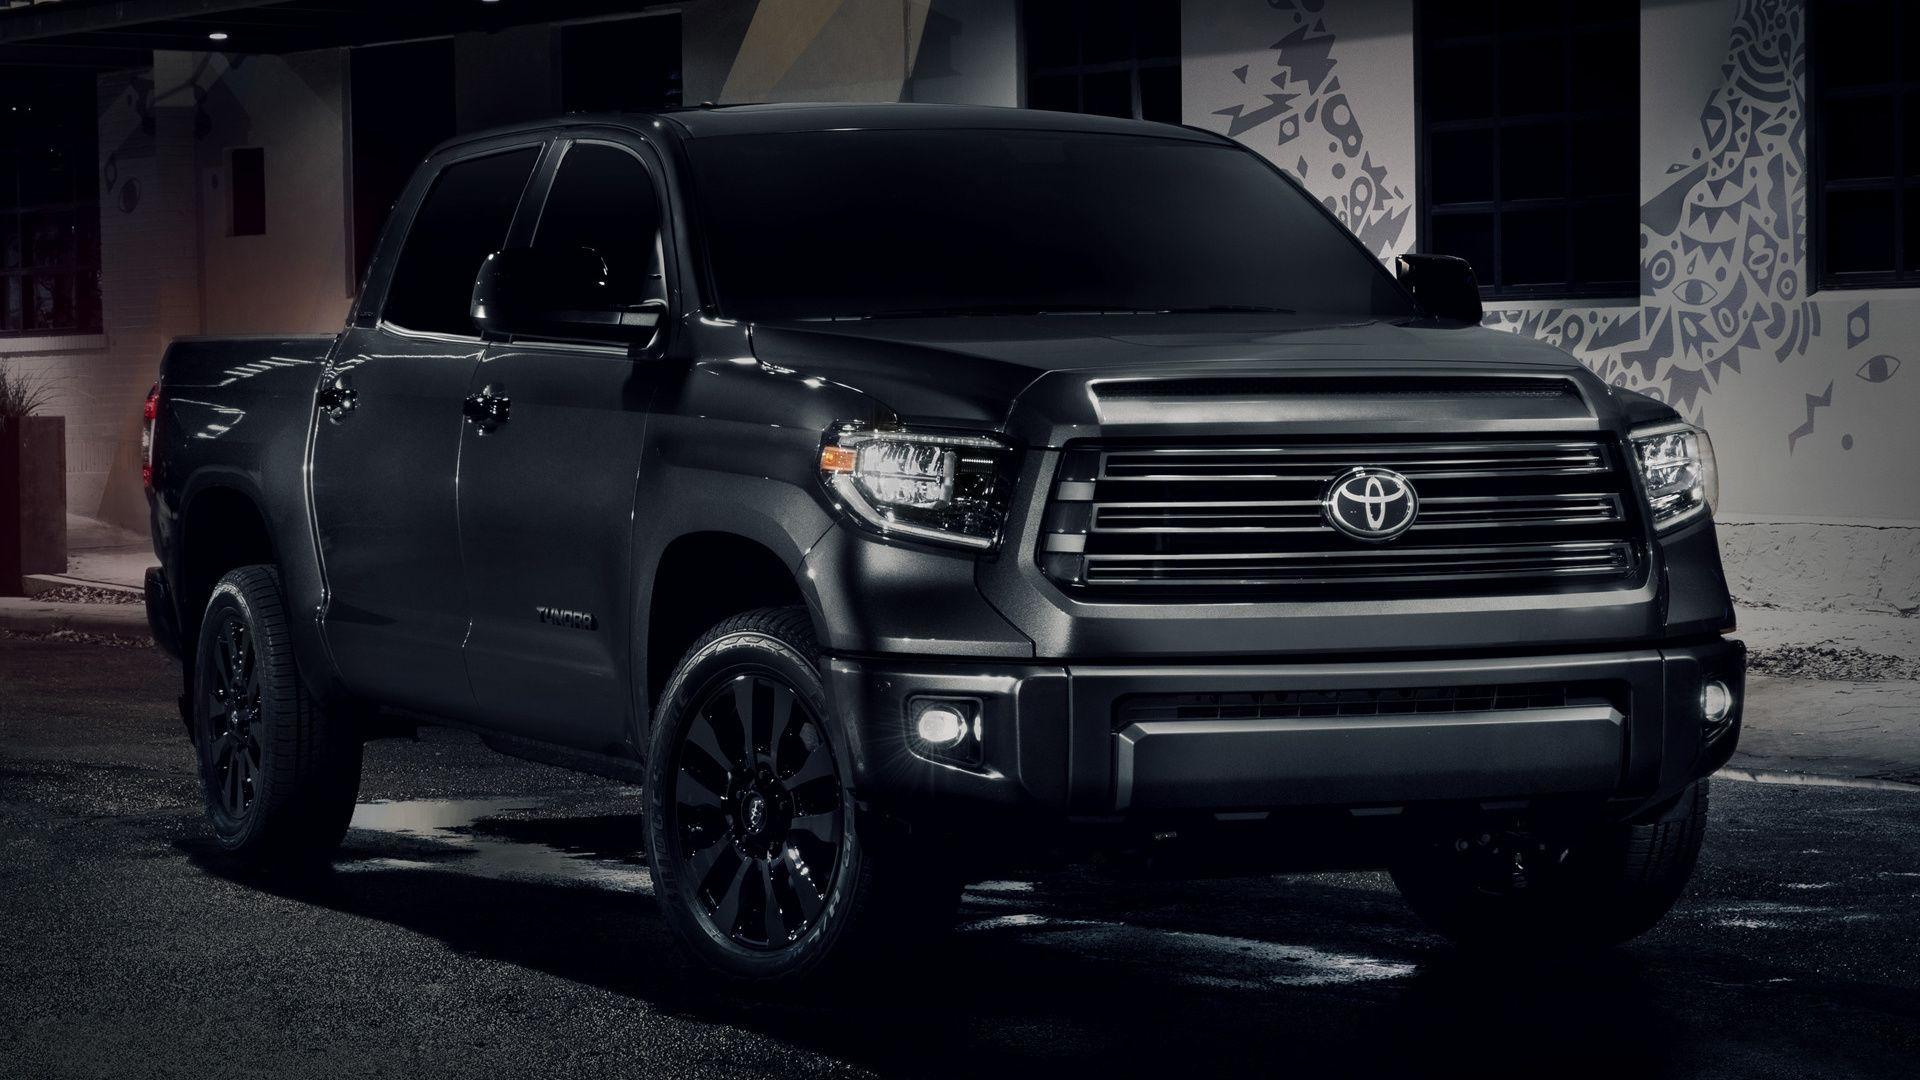 Toyota Tundra HD Wallpapers - Top Free Toyota Tundra HD Backgrounds